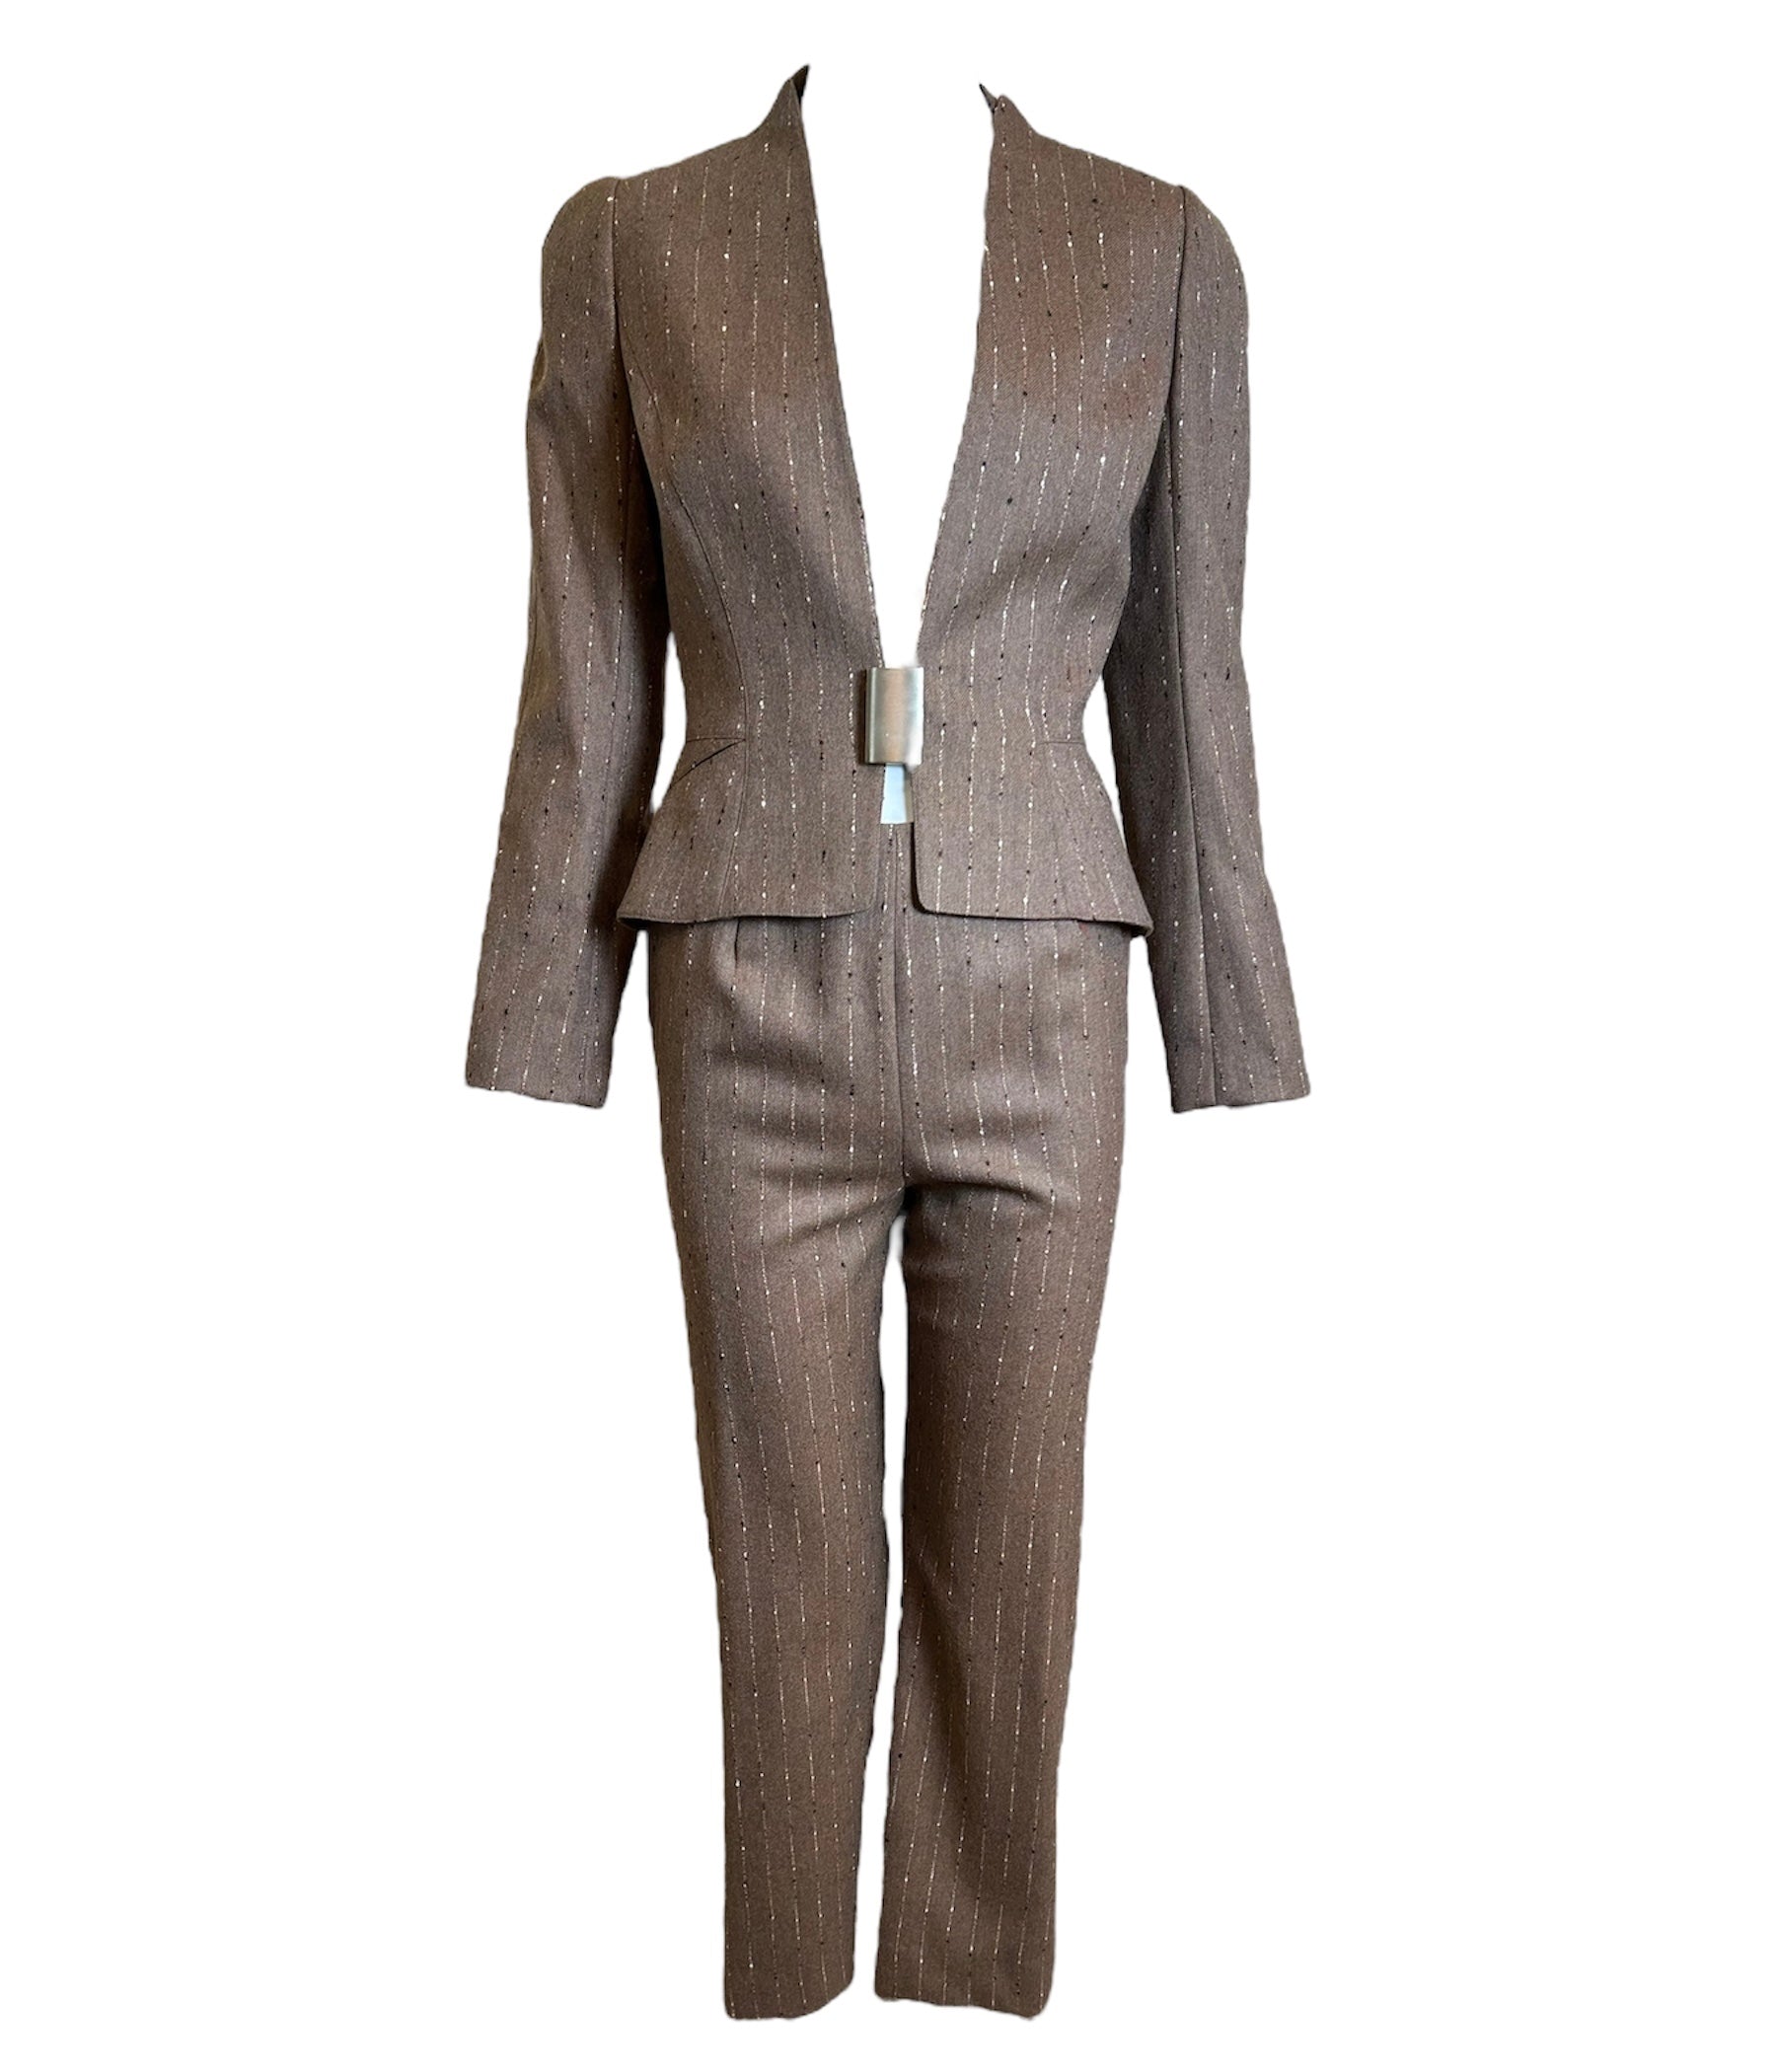 ugler Taupe Pinstripe Suit Ensemble FRONT PHOTO 1 OF 6